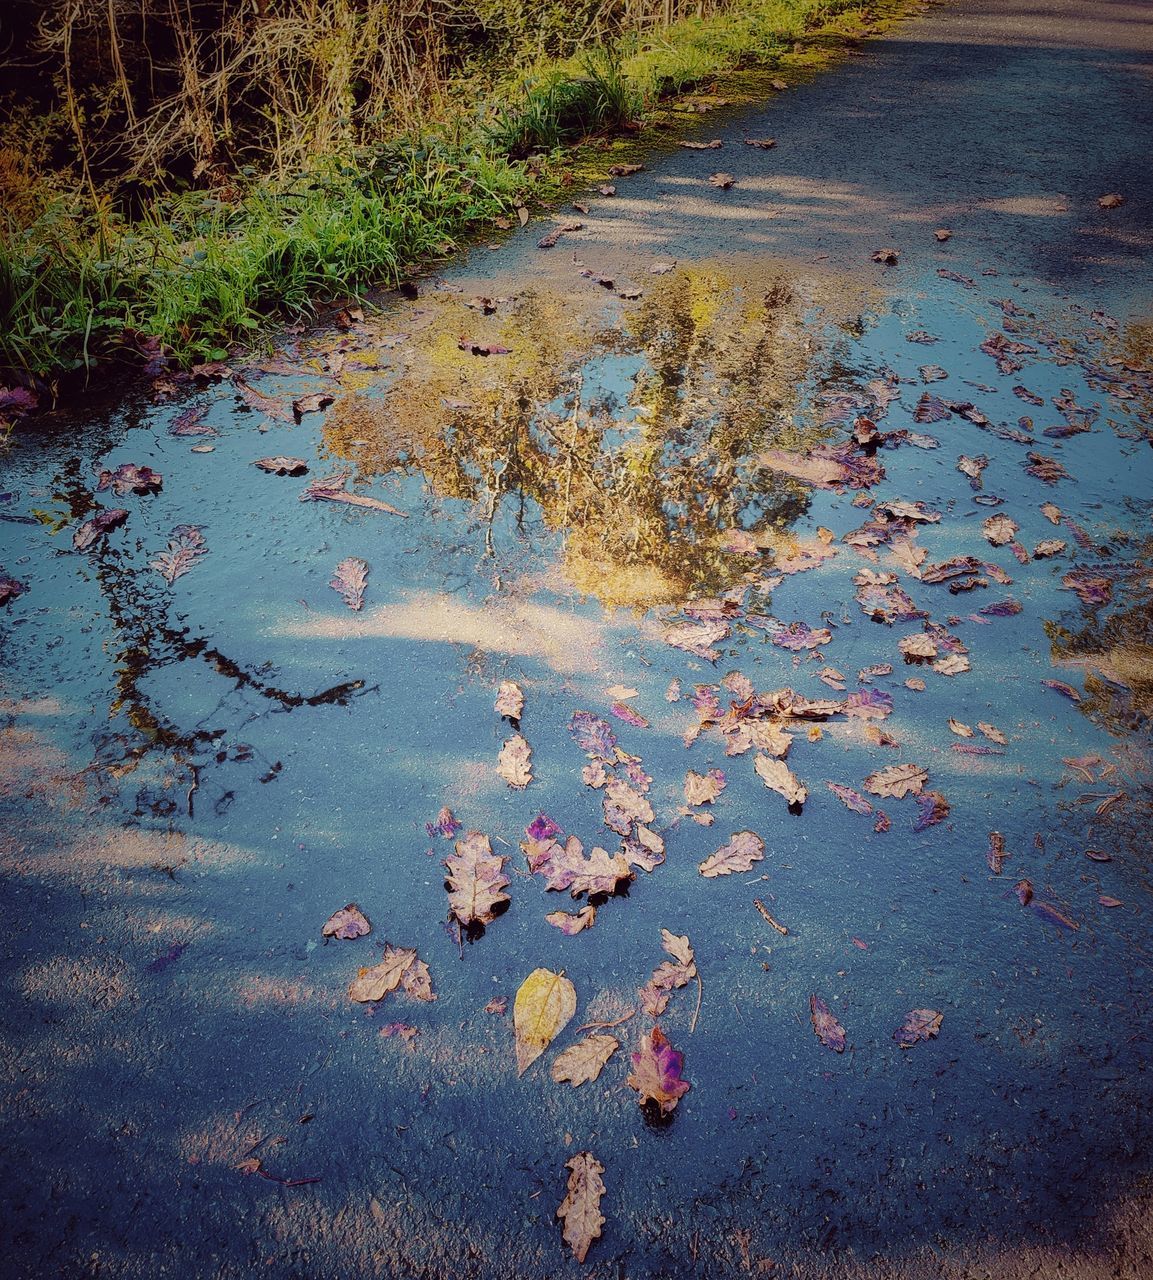 reflection, water, nature, no people, day, leaf, morning, high angle view, puddle, plant, wet, outdoors, autumn, sea, road, land, tranquility, pollution, water pollution, environment, environmental issues, sunlight, dirt, beauty in nature, shore, plant part, transportation